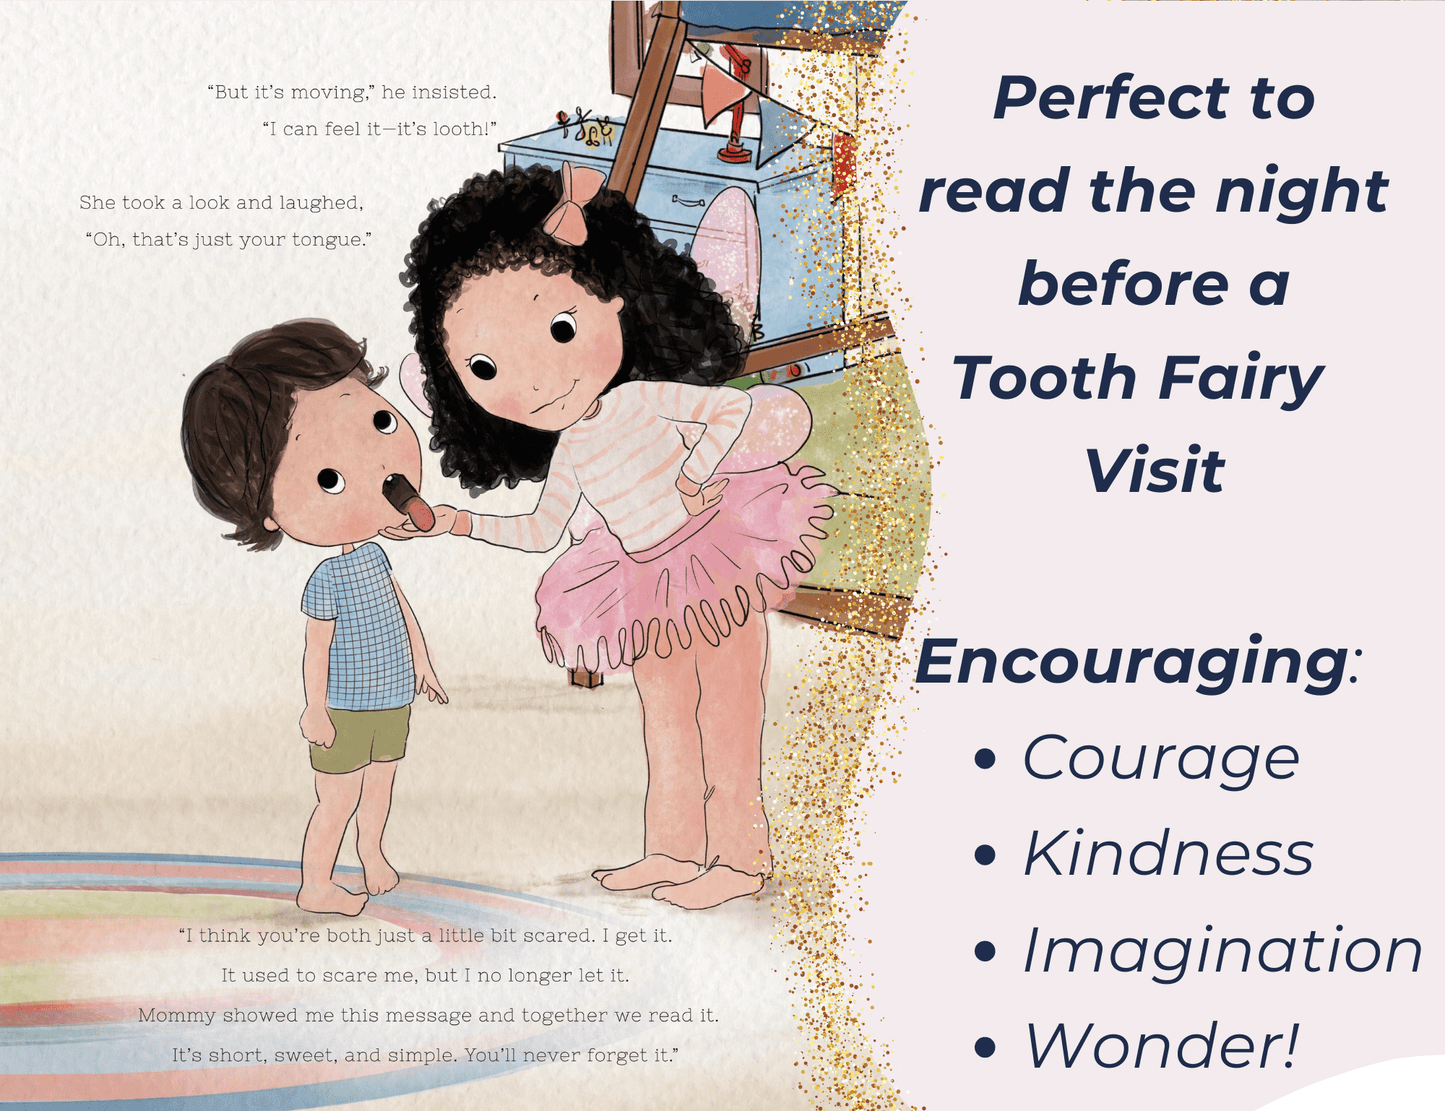 Tooth Fairy Pillow Kit w/ Tooth Fairy Book for Kids- Tooth Be Told Book, Fairy Letter Kit, & Tooth Fairy Pillow - 20MomentsofTooth